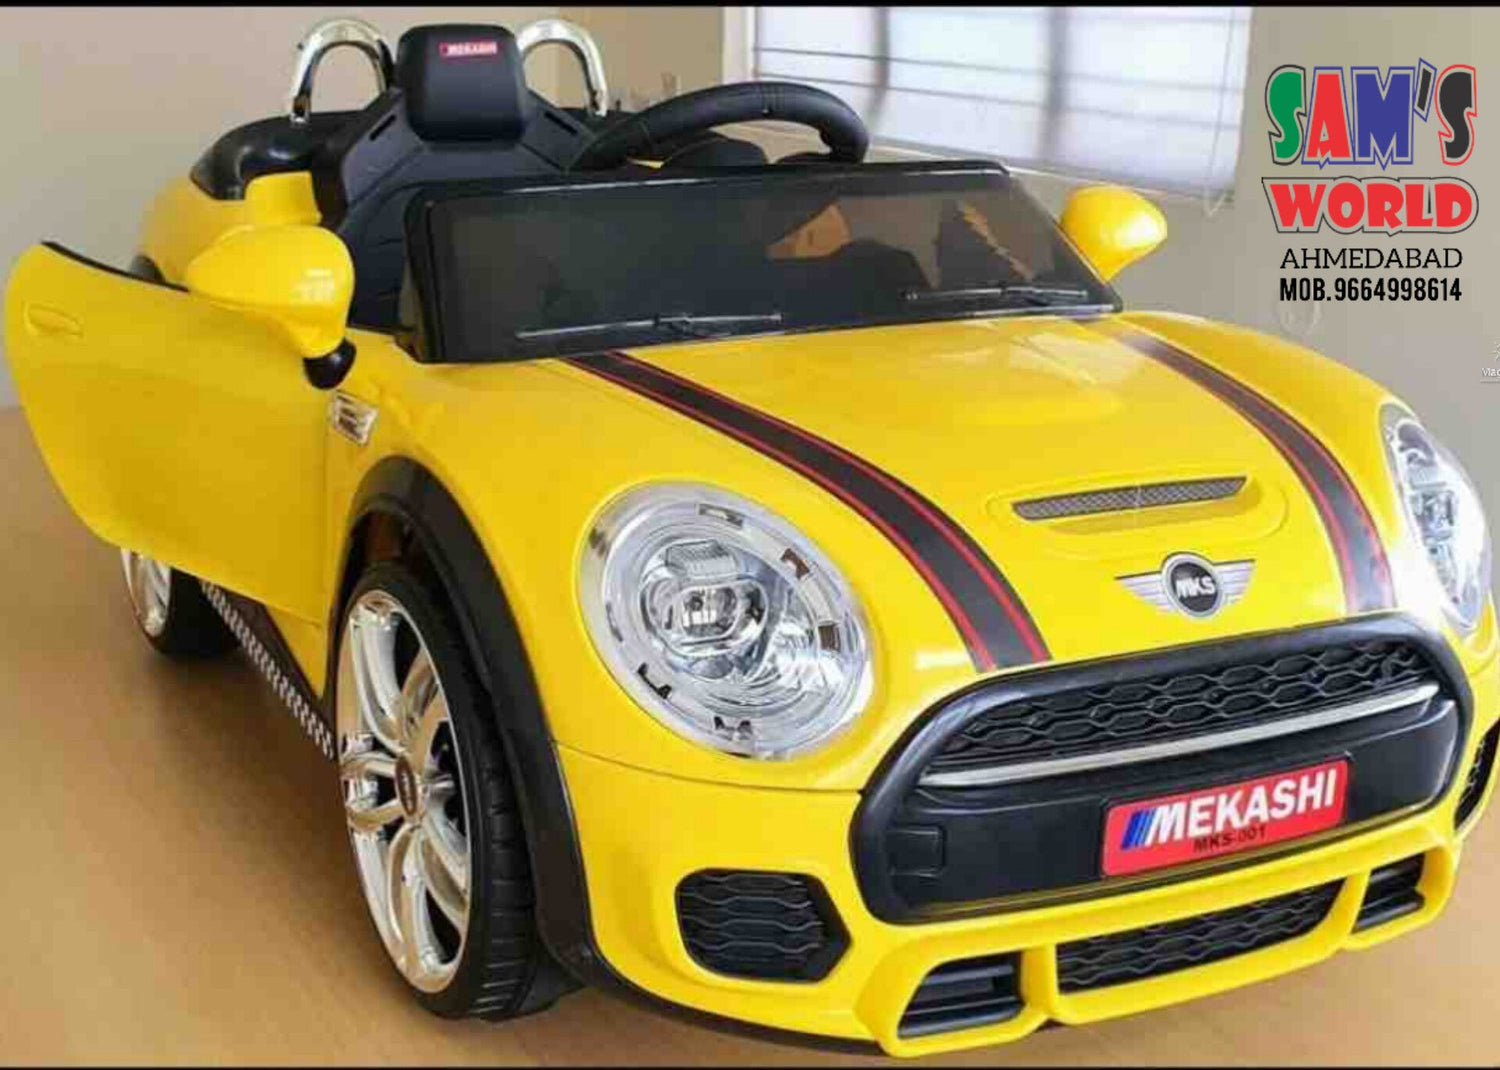 New mekashi ride on car for kids | age 1 To 8 years children | make in India  - samstoy.in